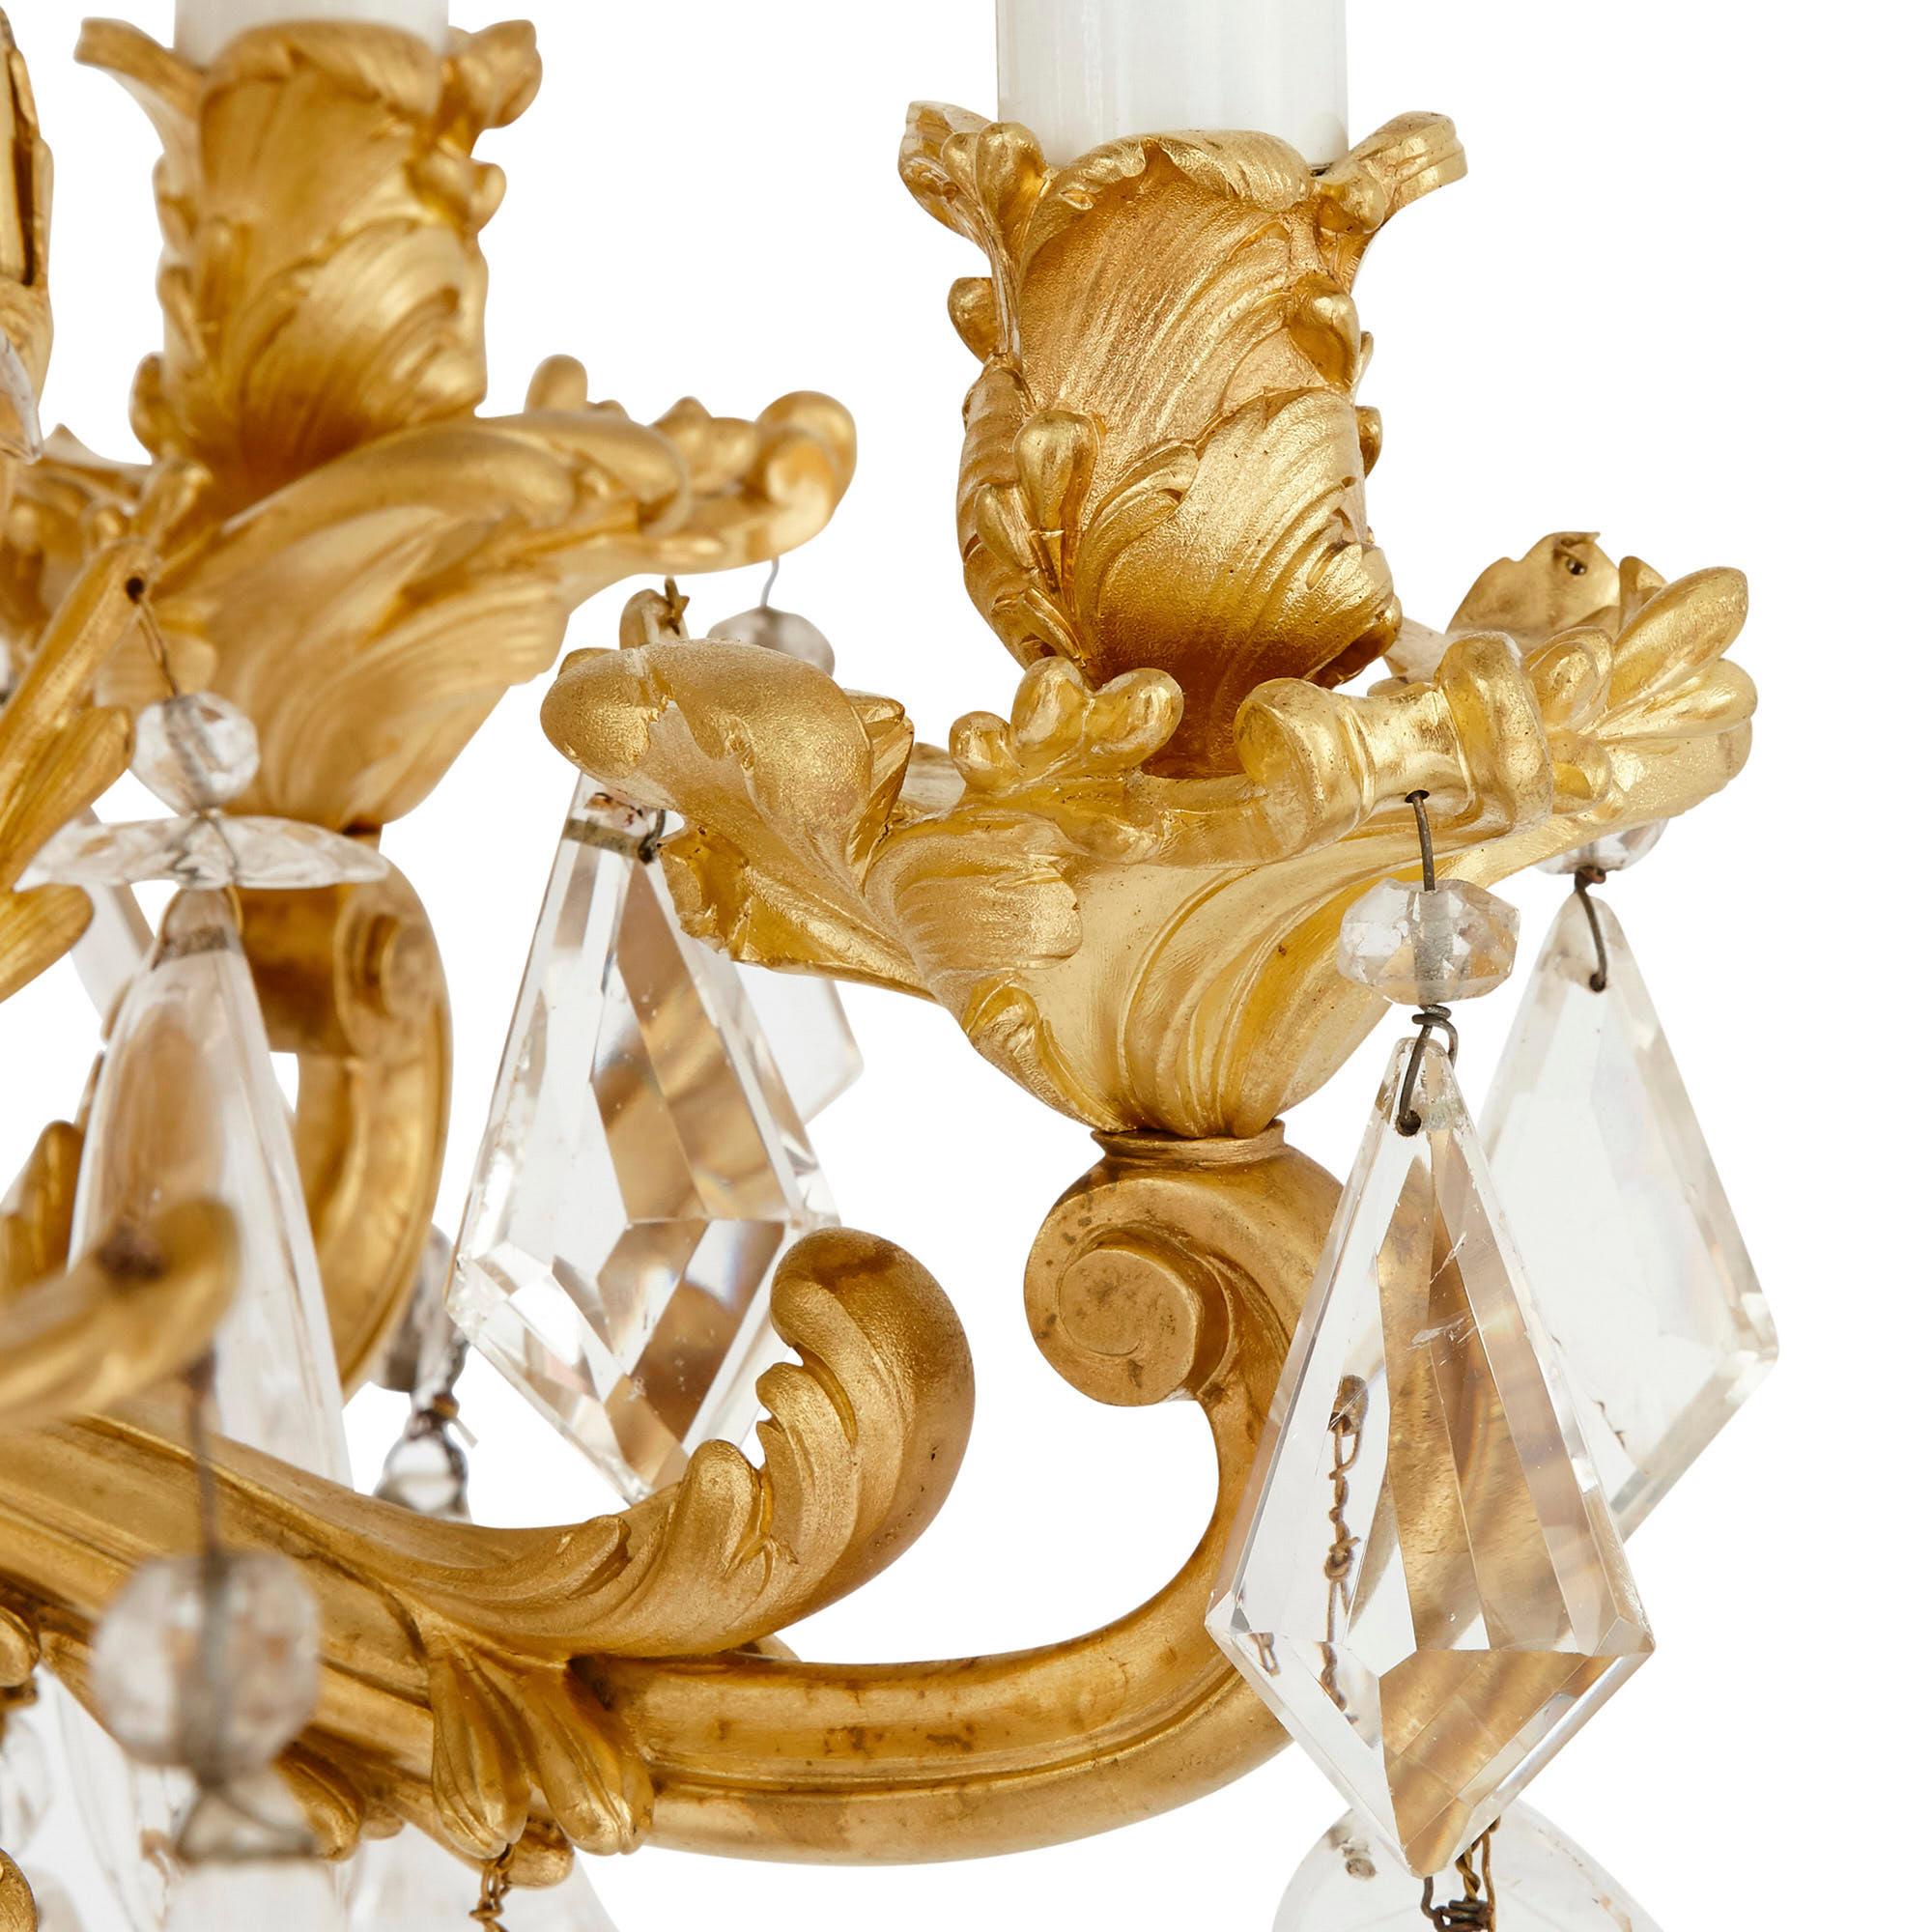 19th Century Antique Rococo Style Ormolu and Cut Glass Twelve-Light Chandelier For Sale